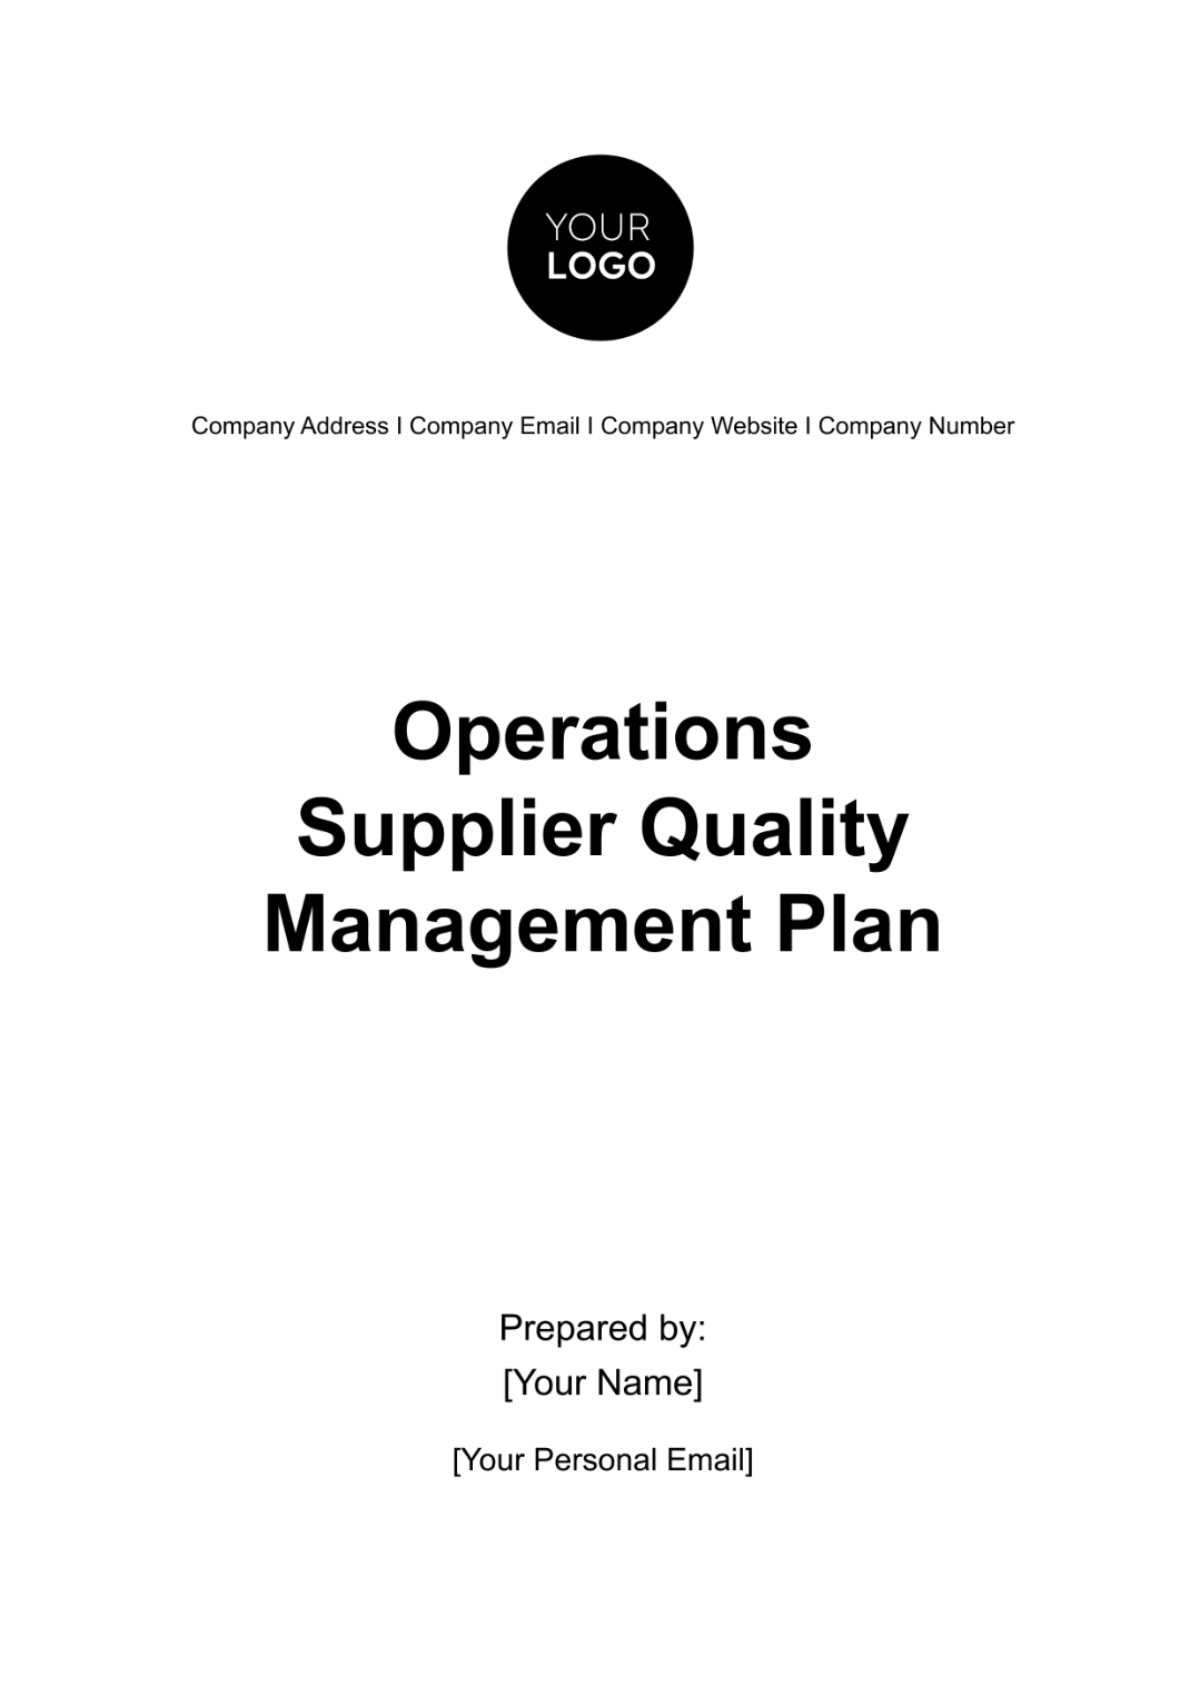 Operations Supplier Quality Management Plan Template